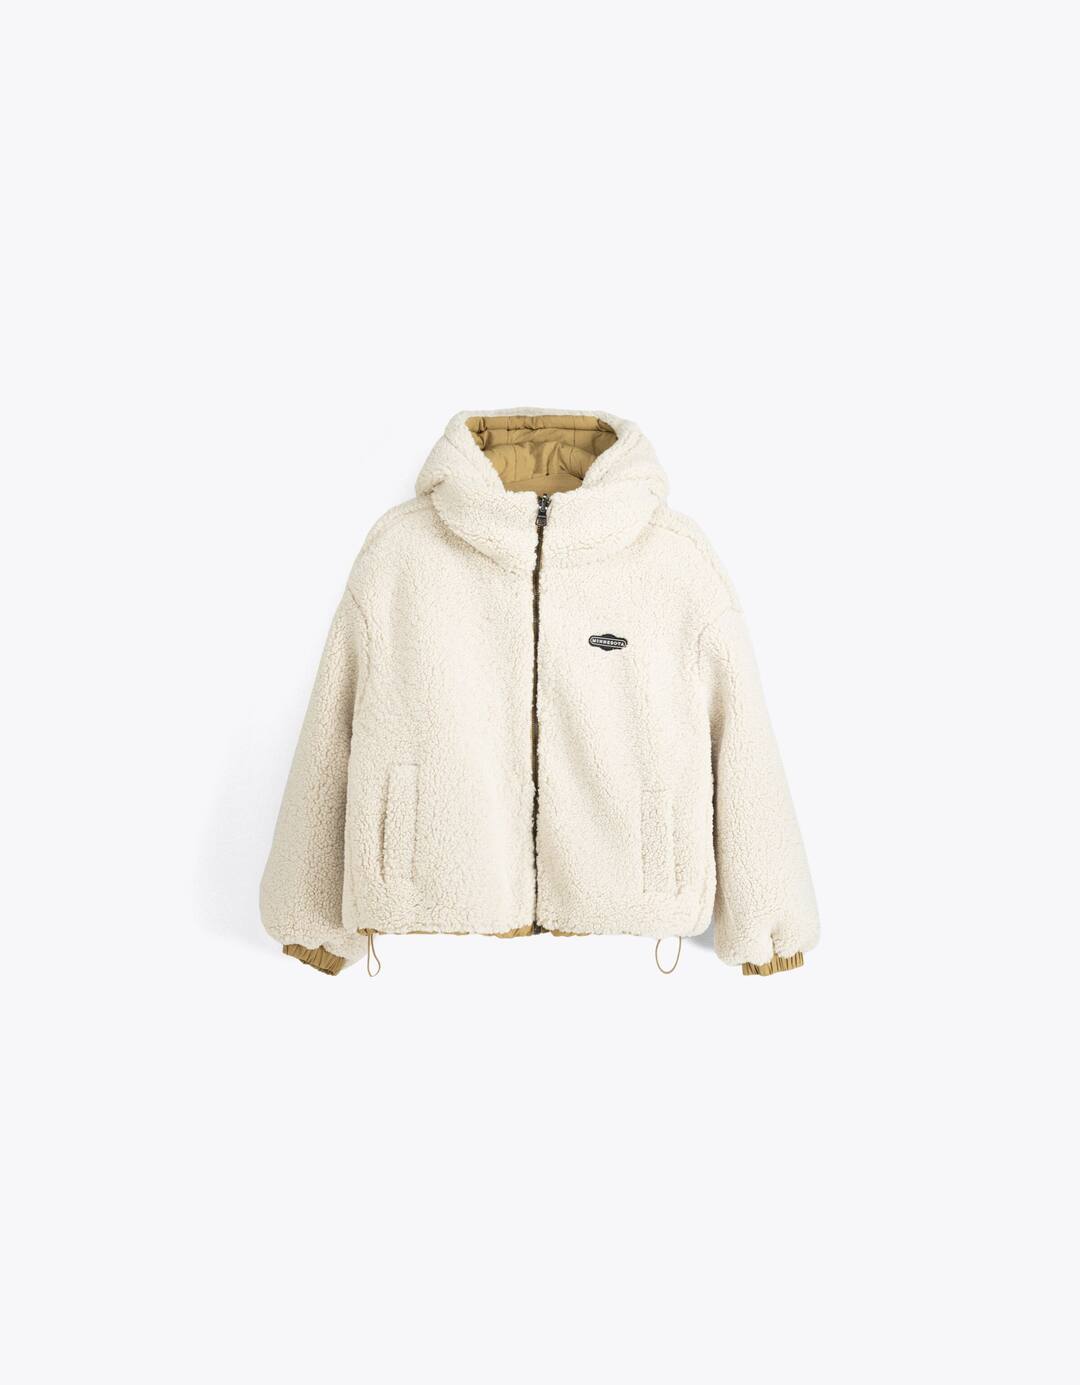 Reversible hoodie nylon blend jacket with faux shearling